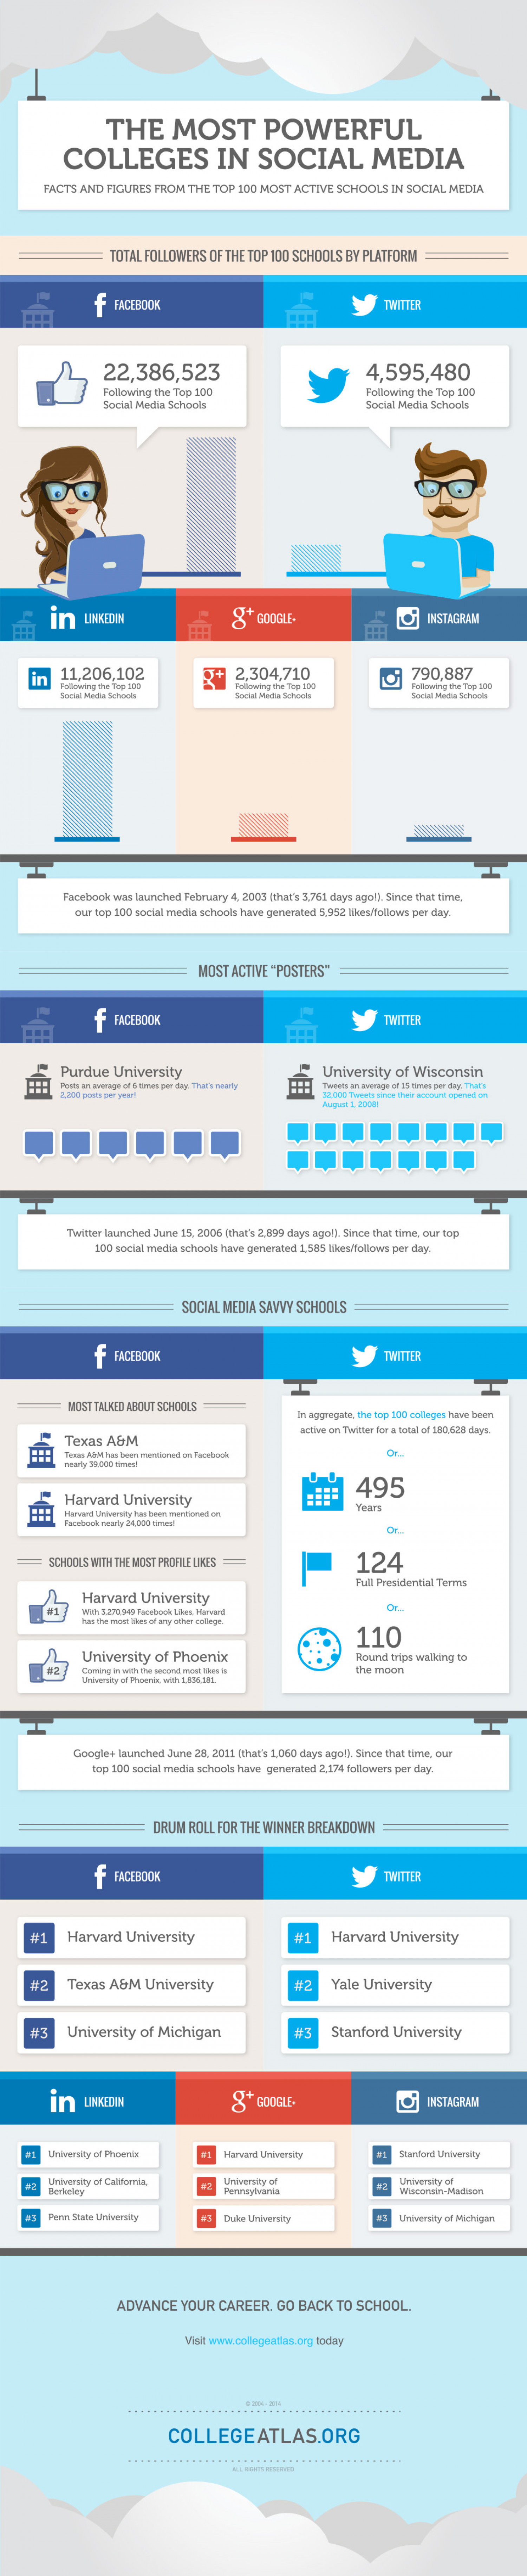 The Most Powerful Colleges in Social Media Infographic